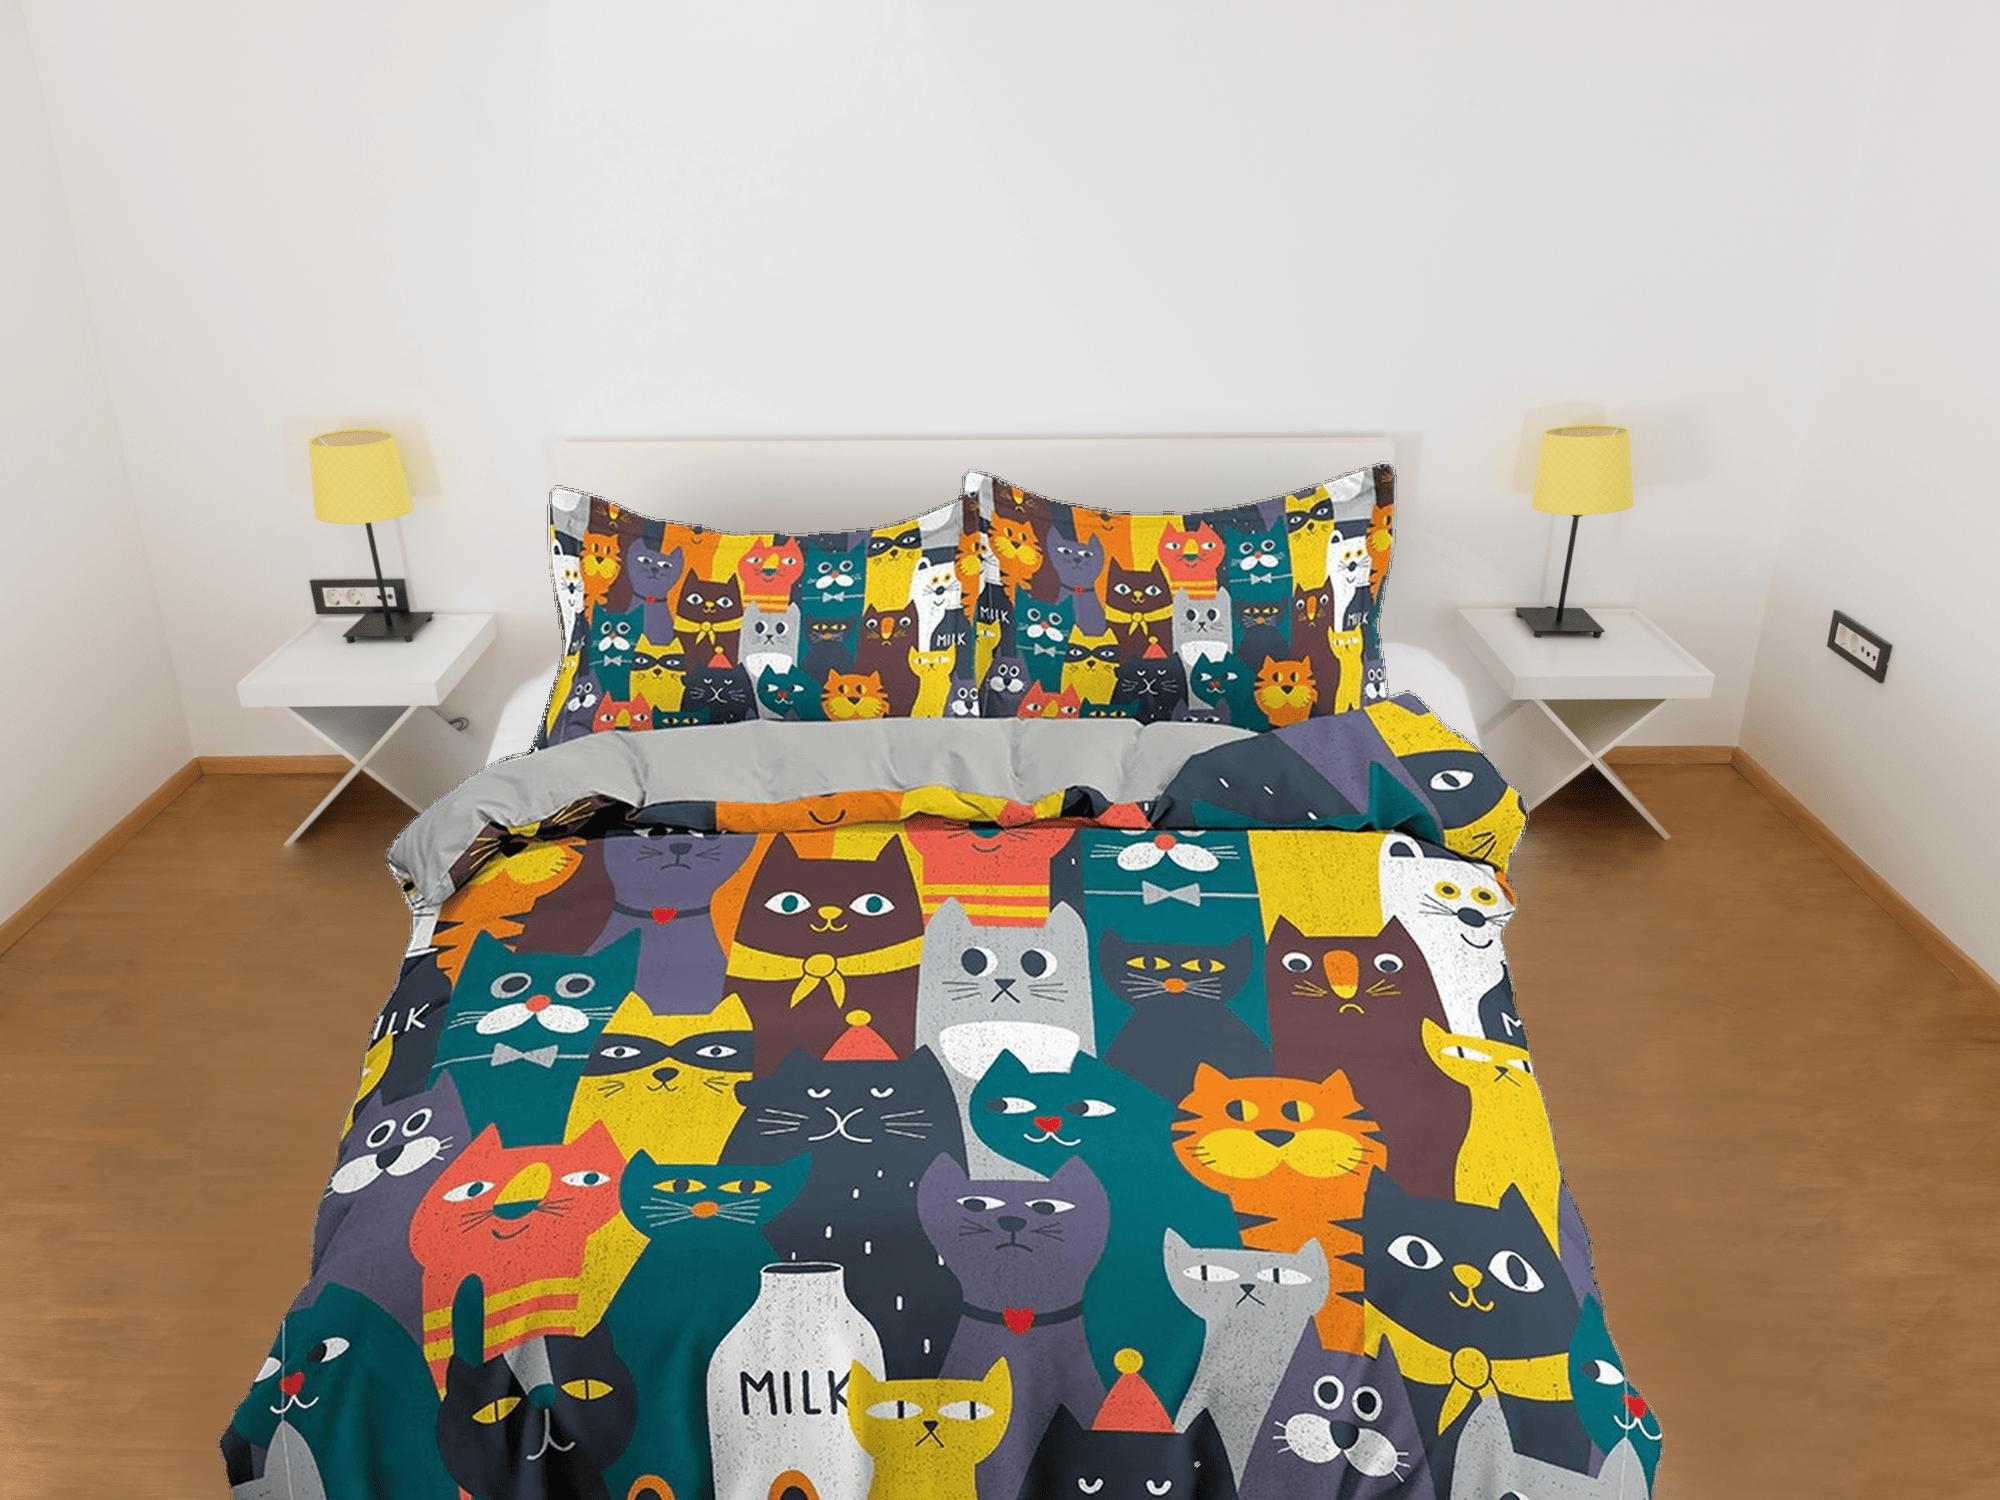 daintyduvet Colorful cats toddler bedding, unique duvet cover for nursery kids, crib bedding for cat lovers, baby zipper bedding, king queen full twin